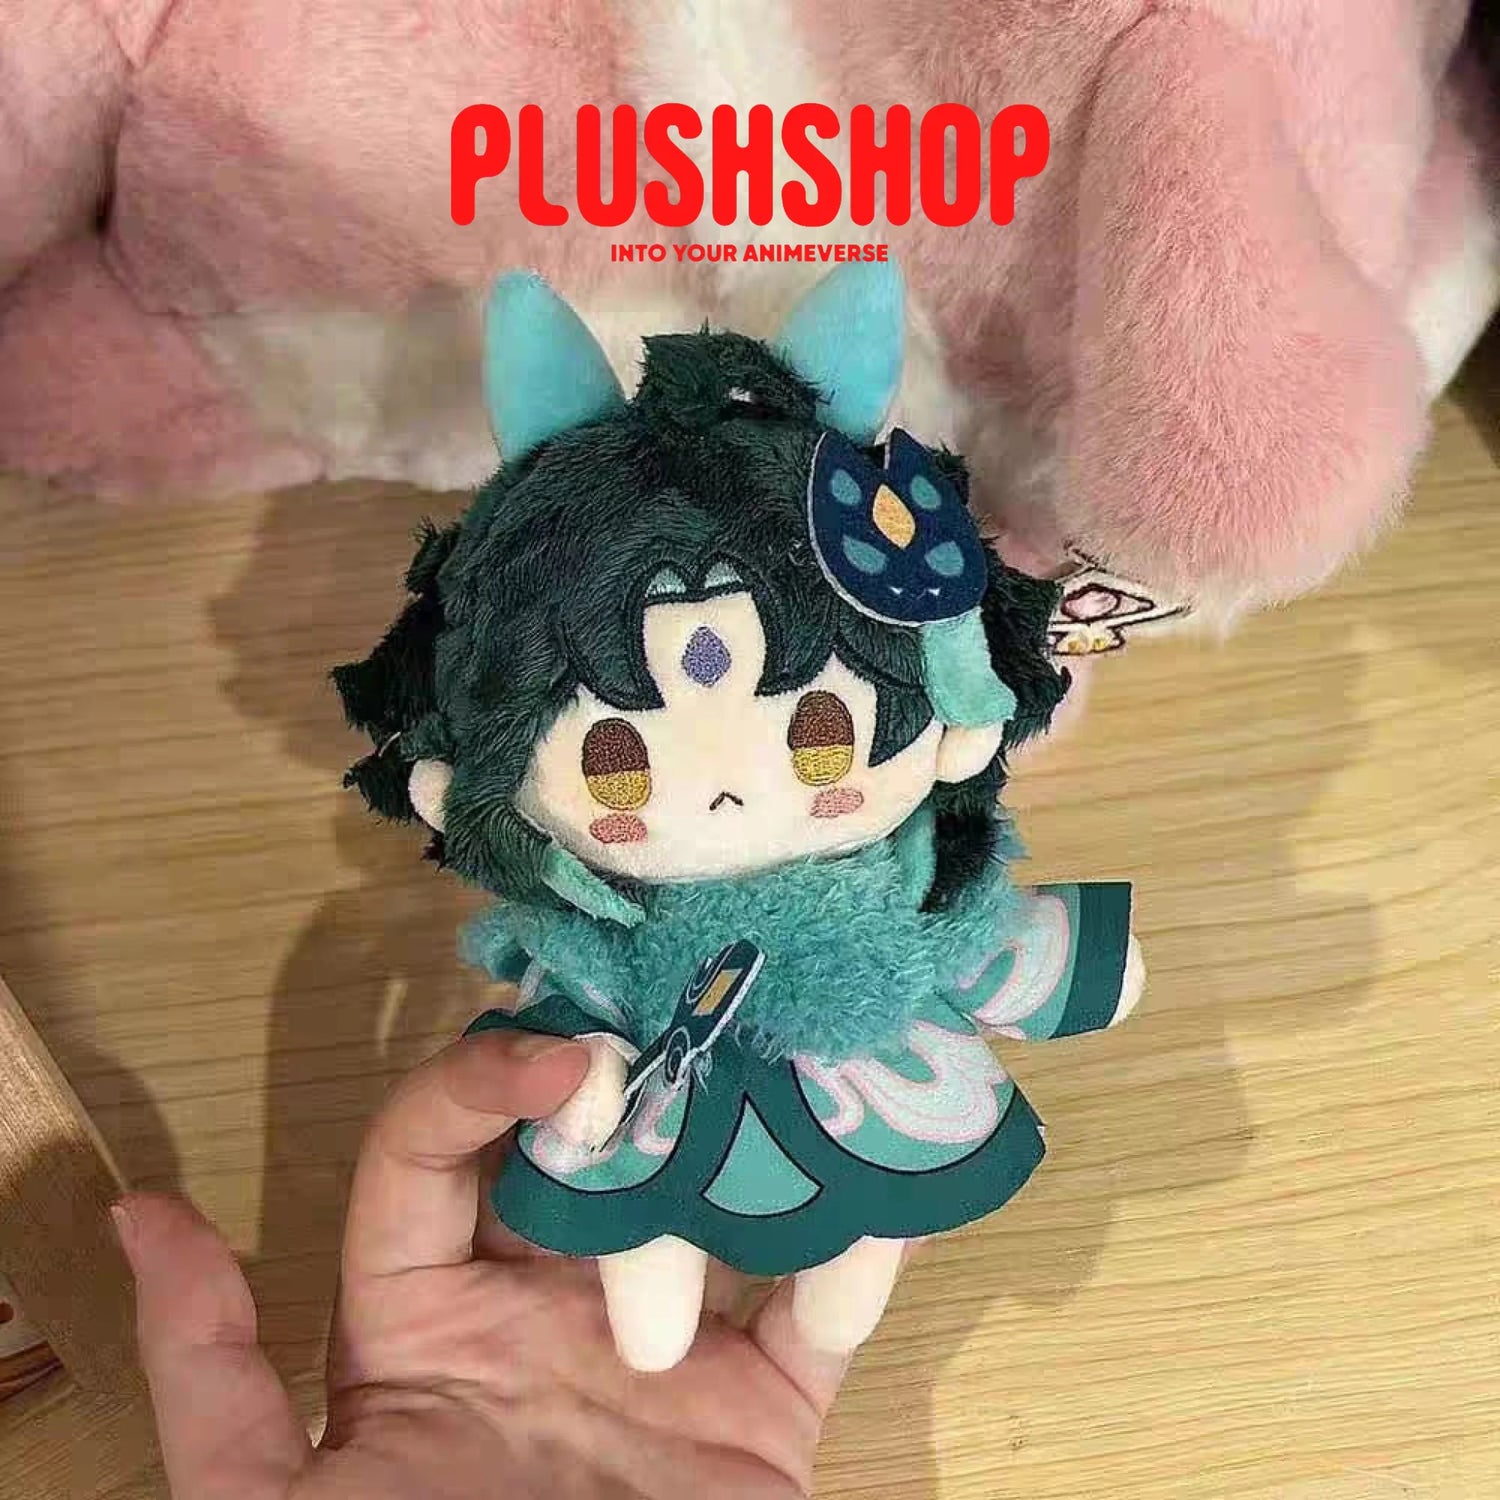 12Cm Genshin Impact Characters Abyss Mage Cute Plush Keychainpre-Order Ship Within 30 Days)